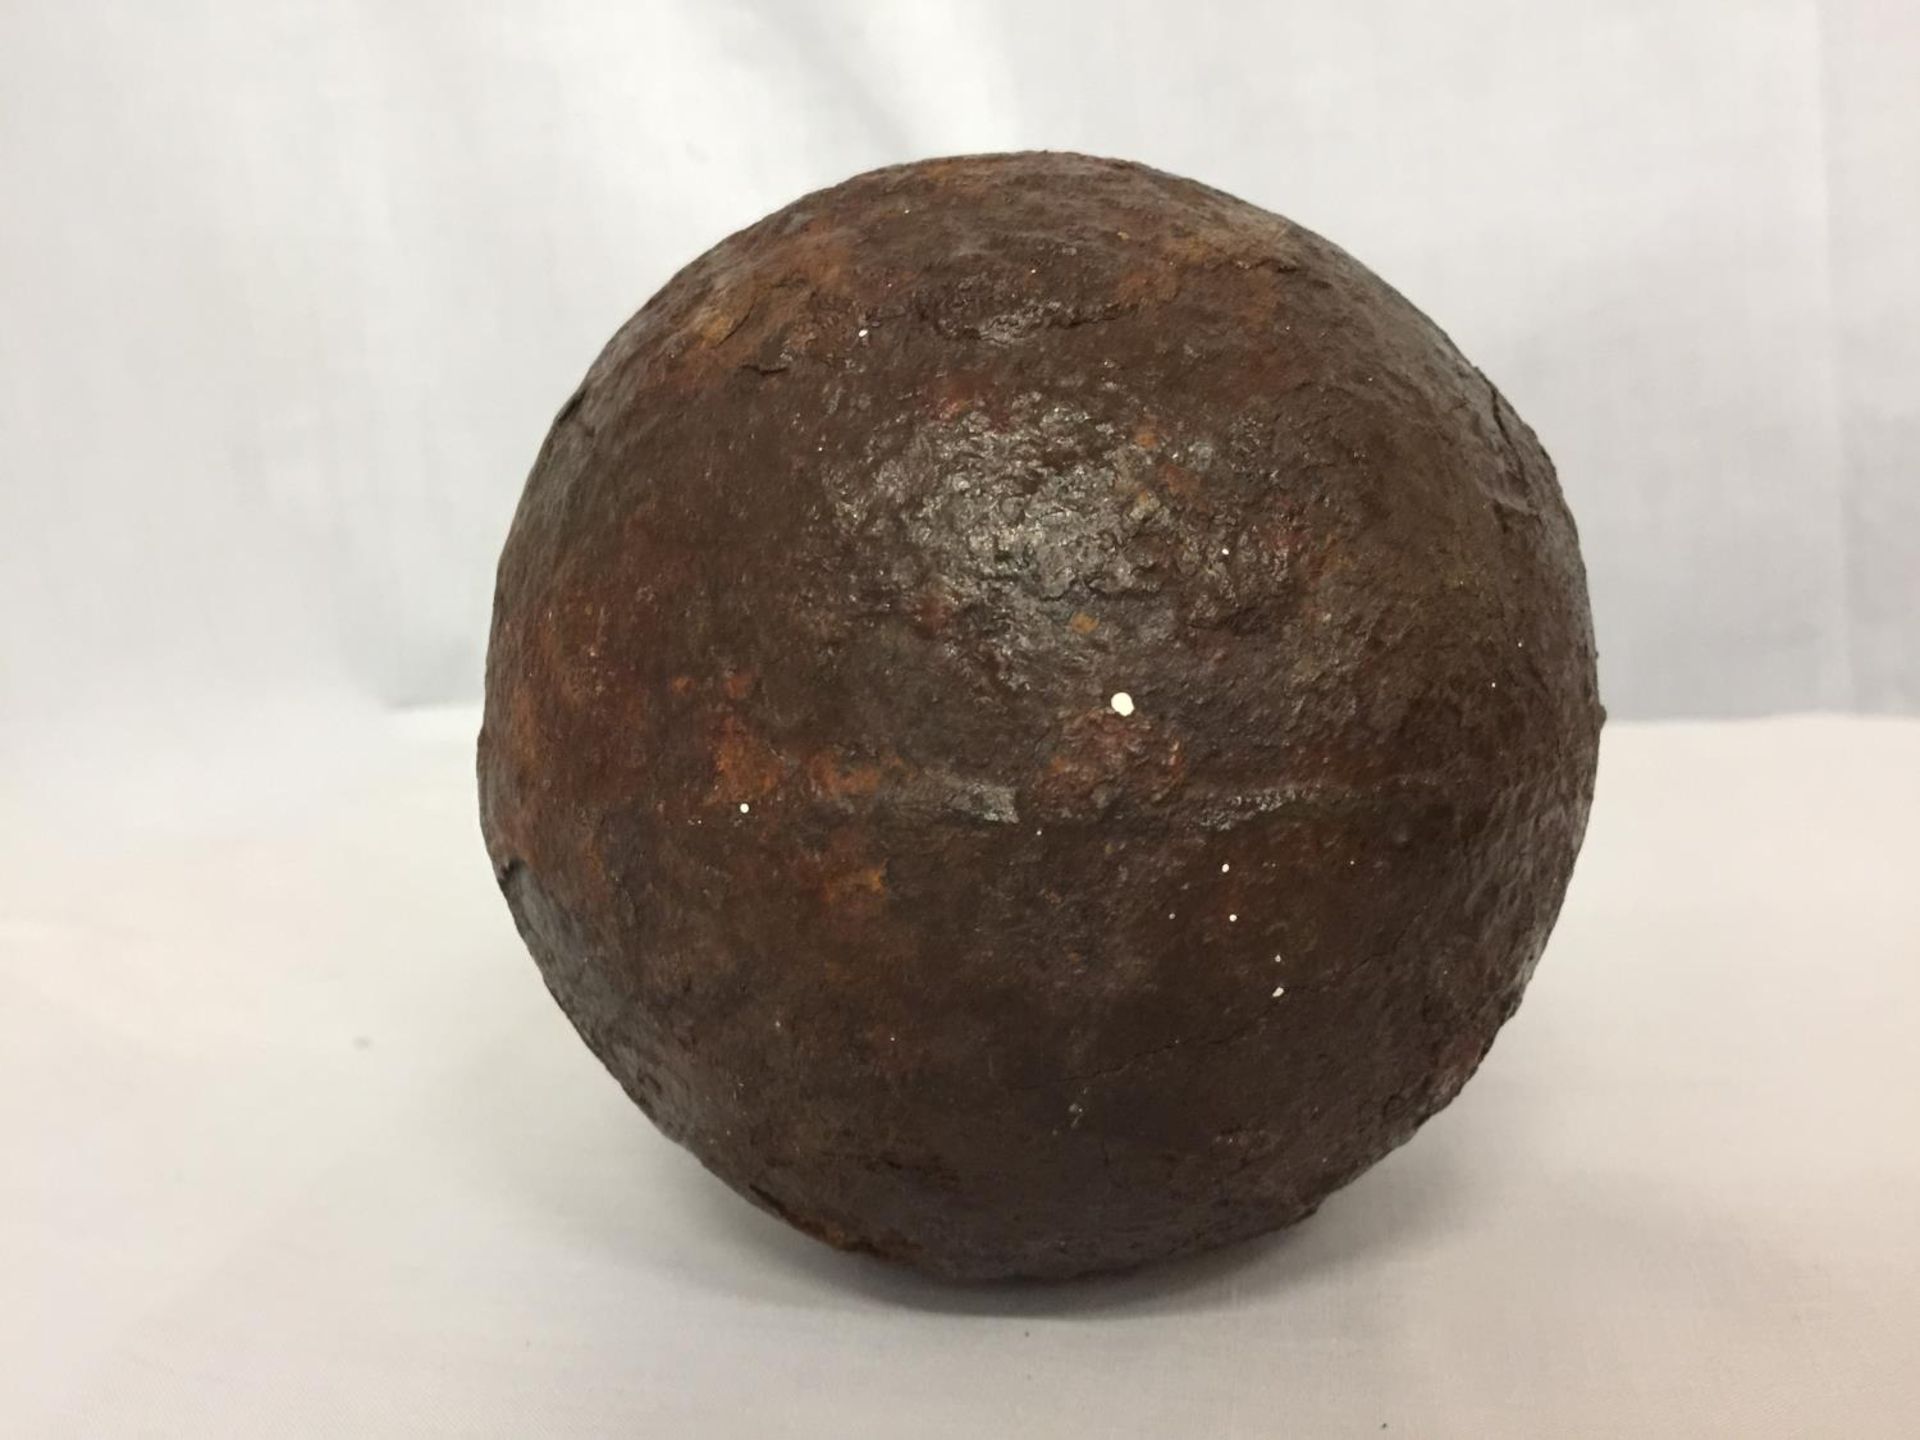 A LARGE CANNON BALL FROM H.M.S. ASSOCIATION WHICH SANK IN 1707 - Image 2 of 3